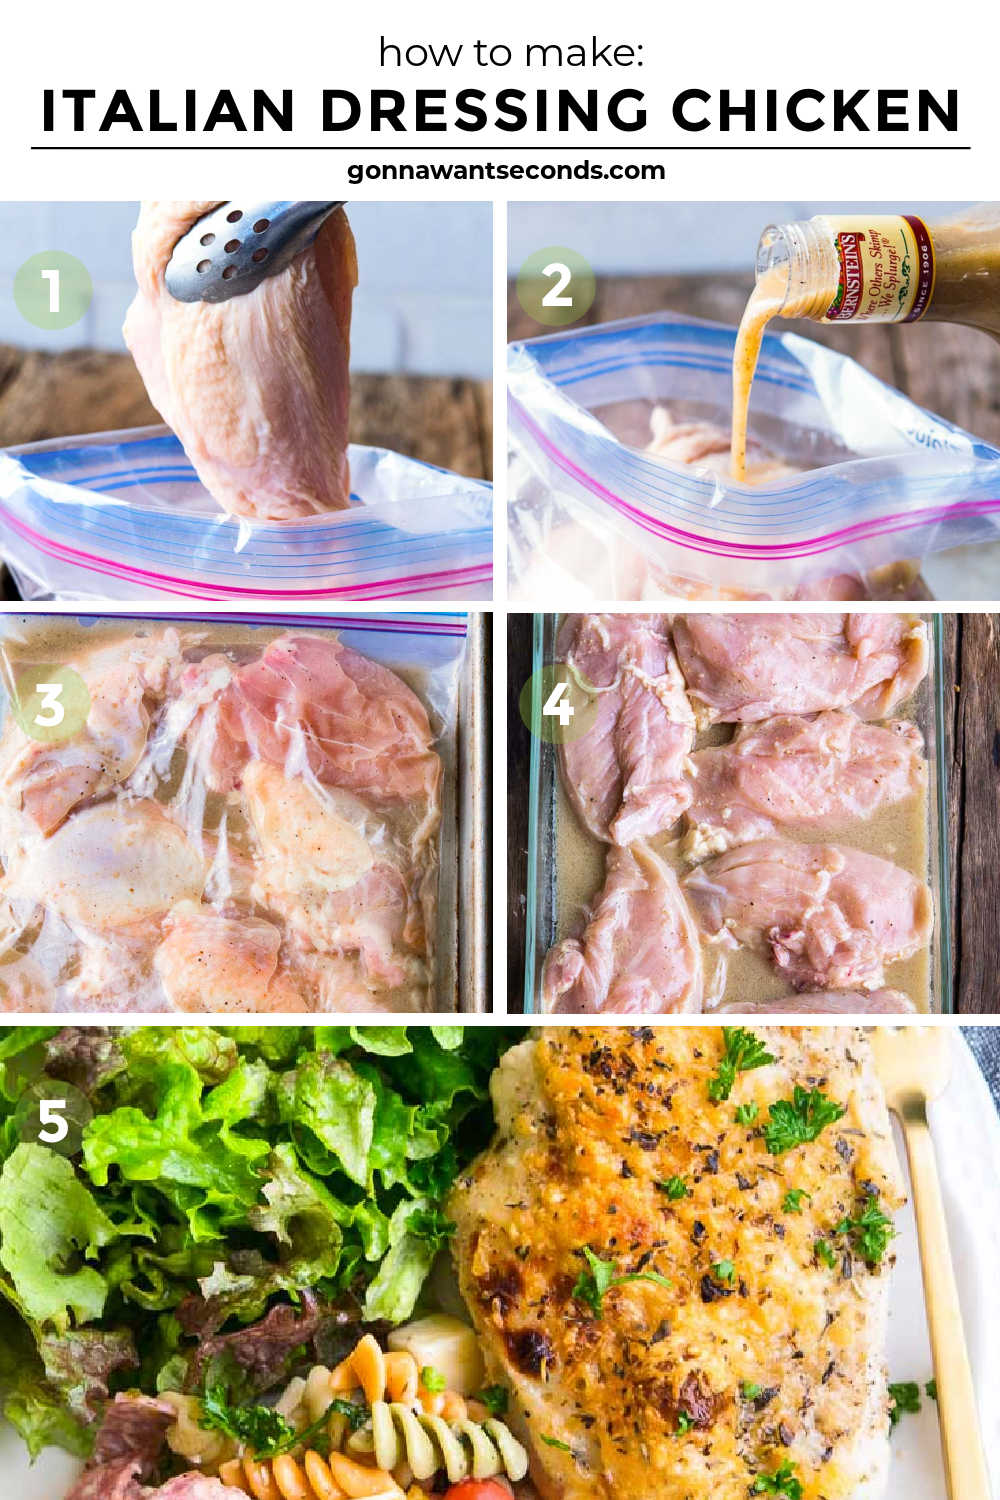 Step by step how to make Italian Dressing Chicken